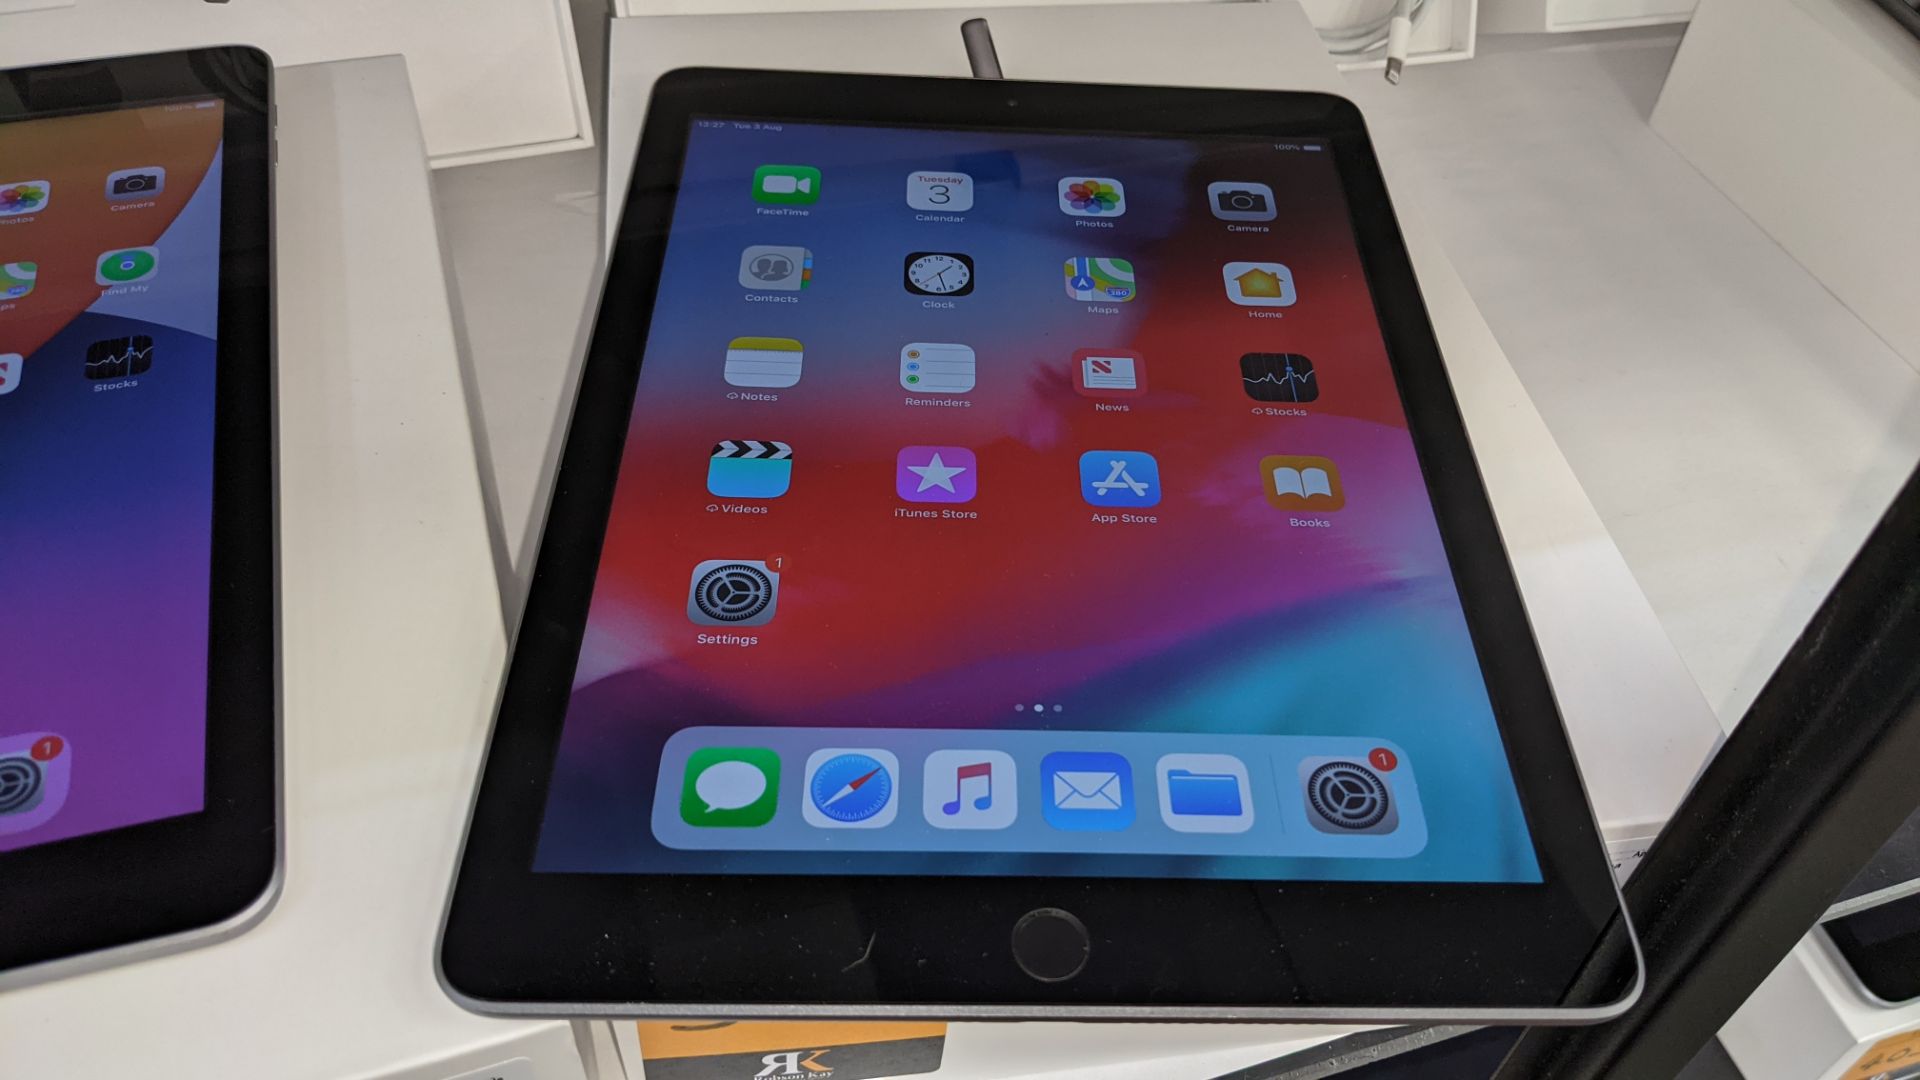 Apple iPad (space grey) 5th generation 32Gb Wi-Fi 9.7" Retina screen. Product code A1822. Apple A9 - Image 6 of 8